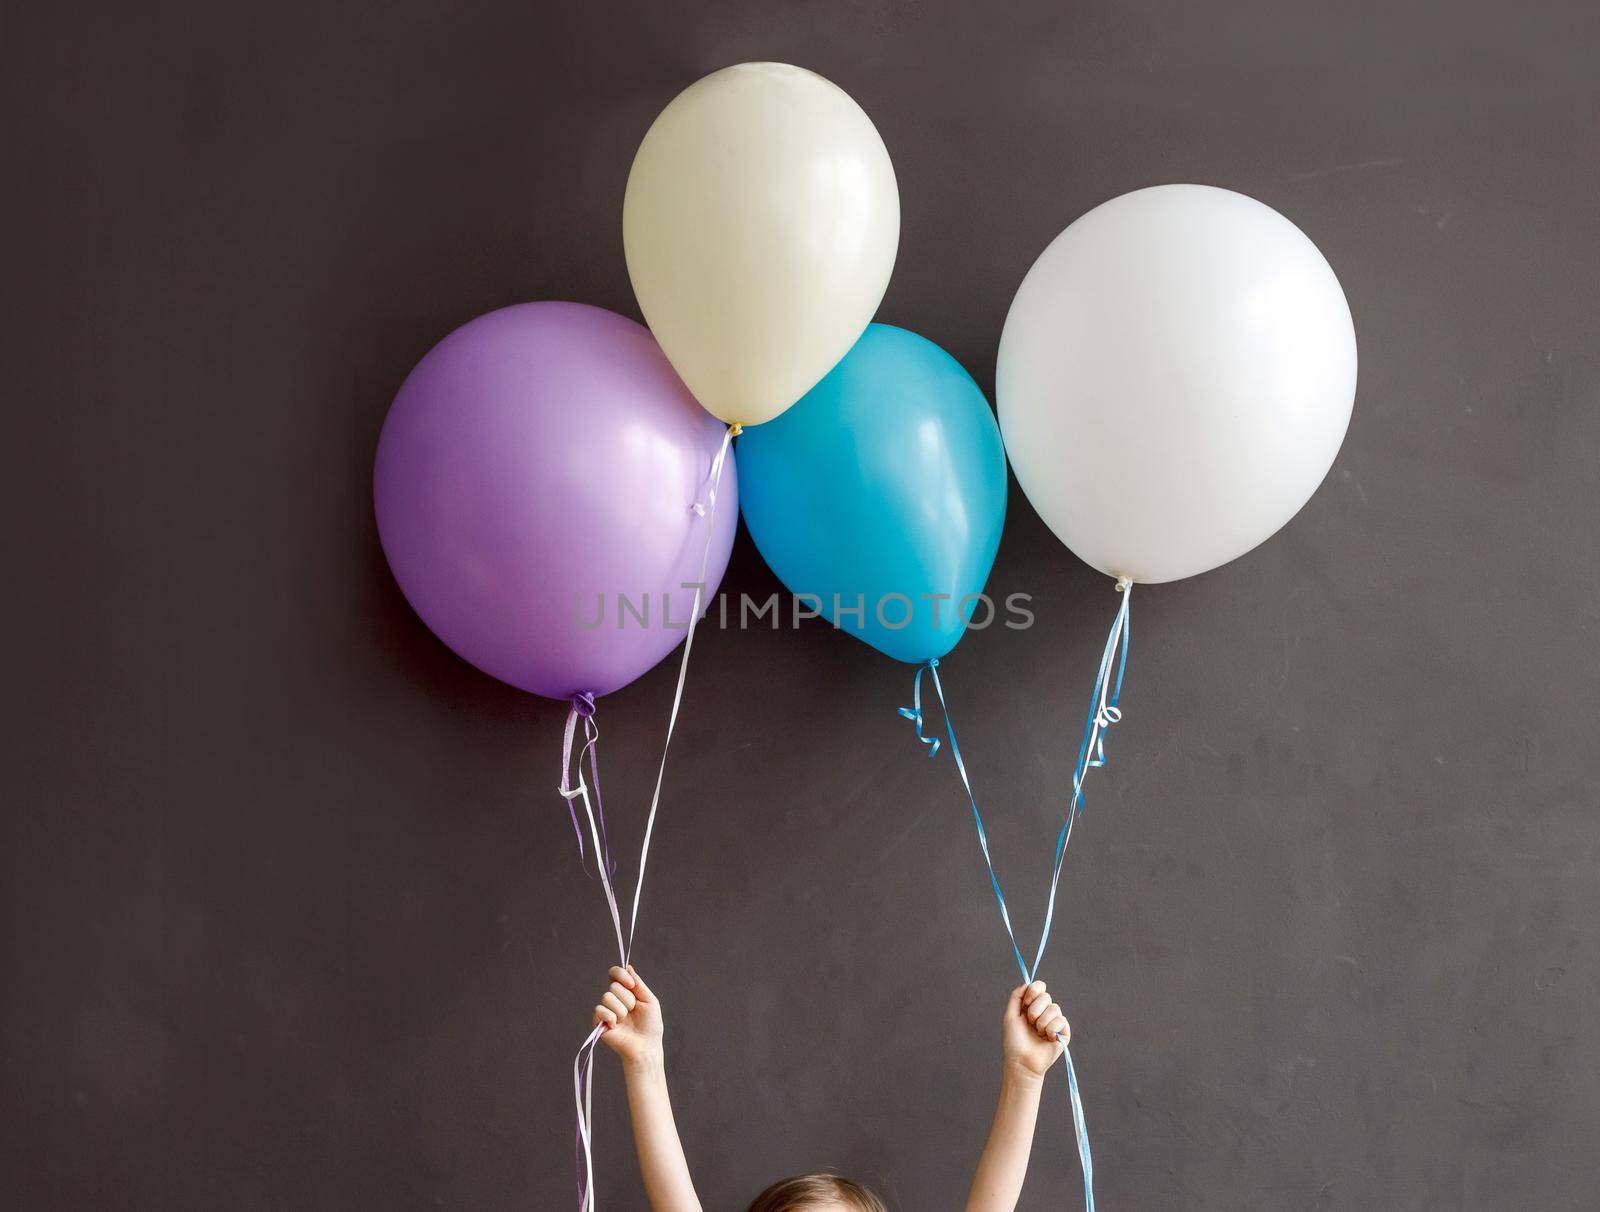 Crop small kid hands holding four bright floating balloons on dark grey background